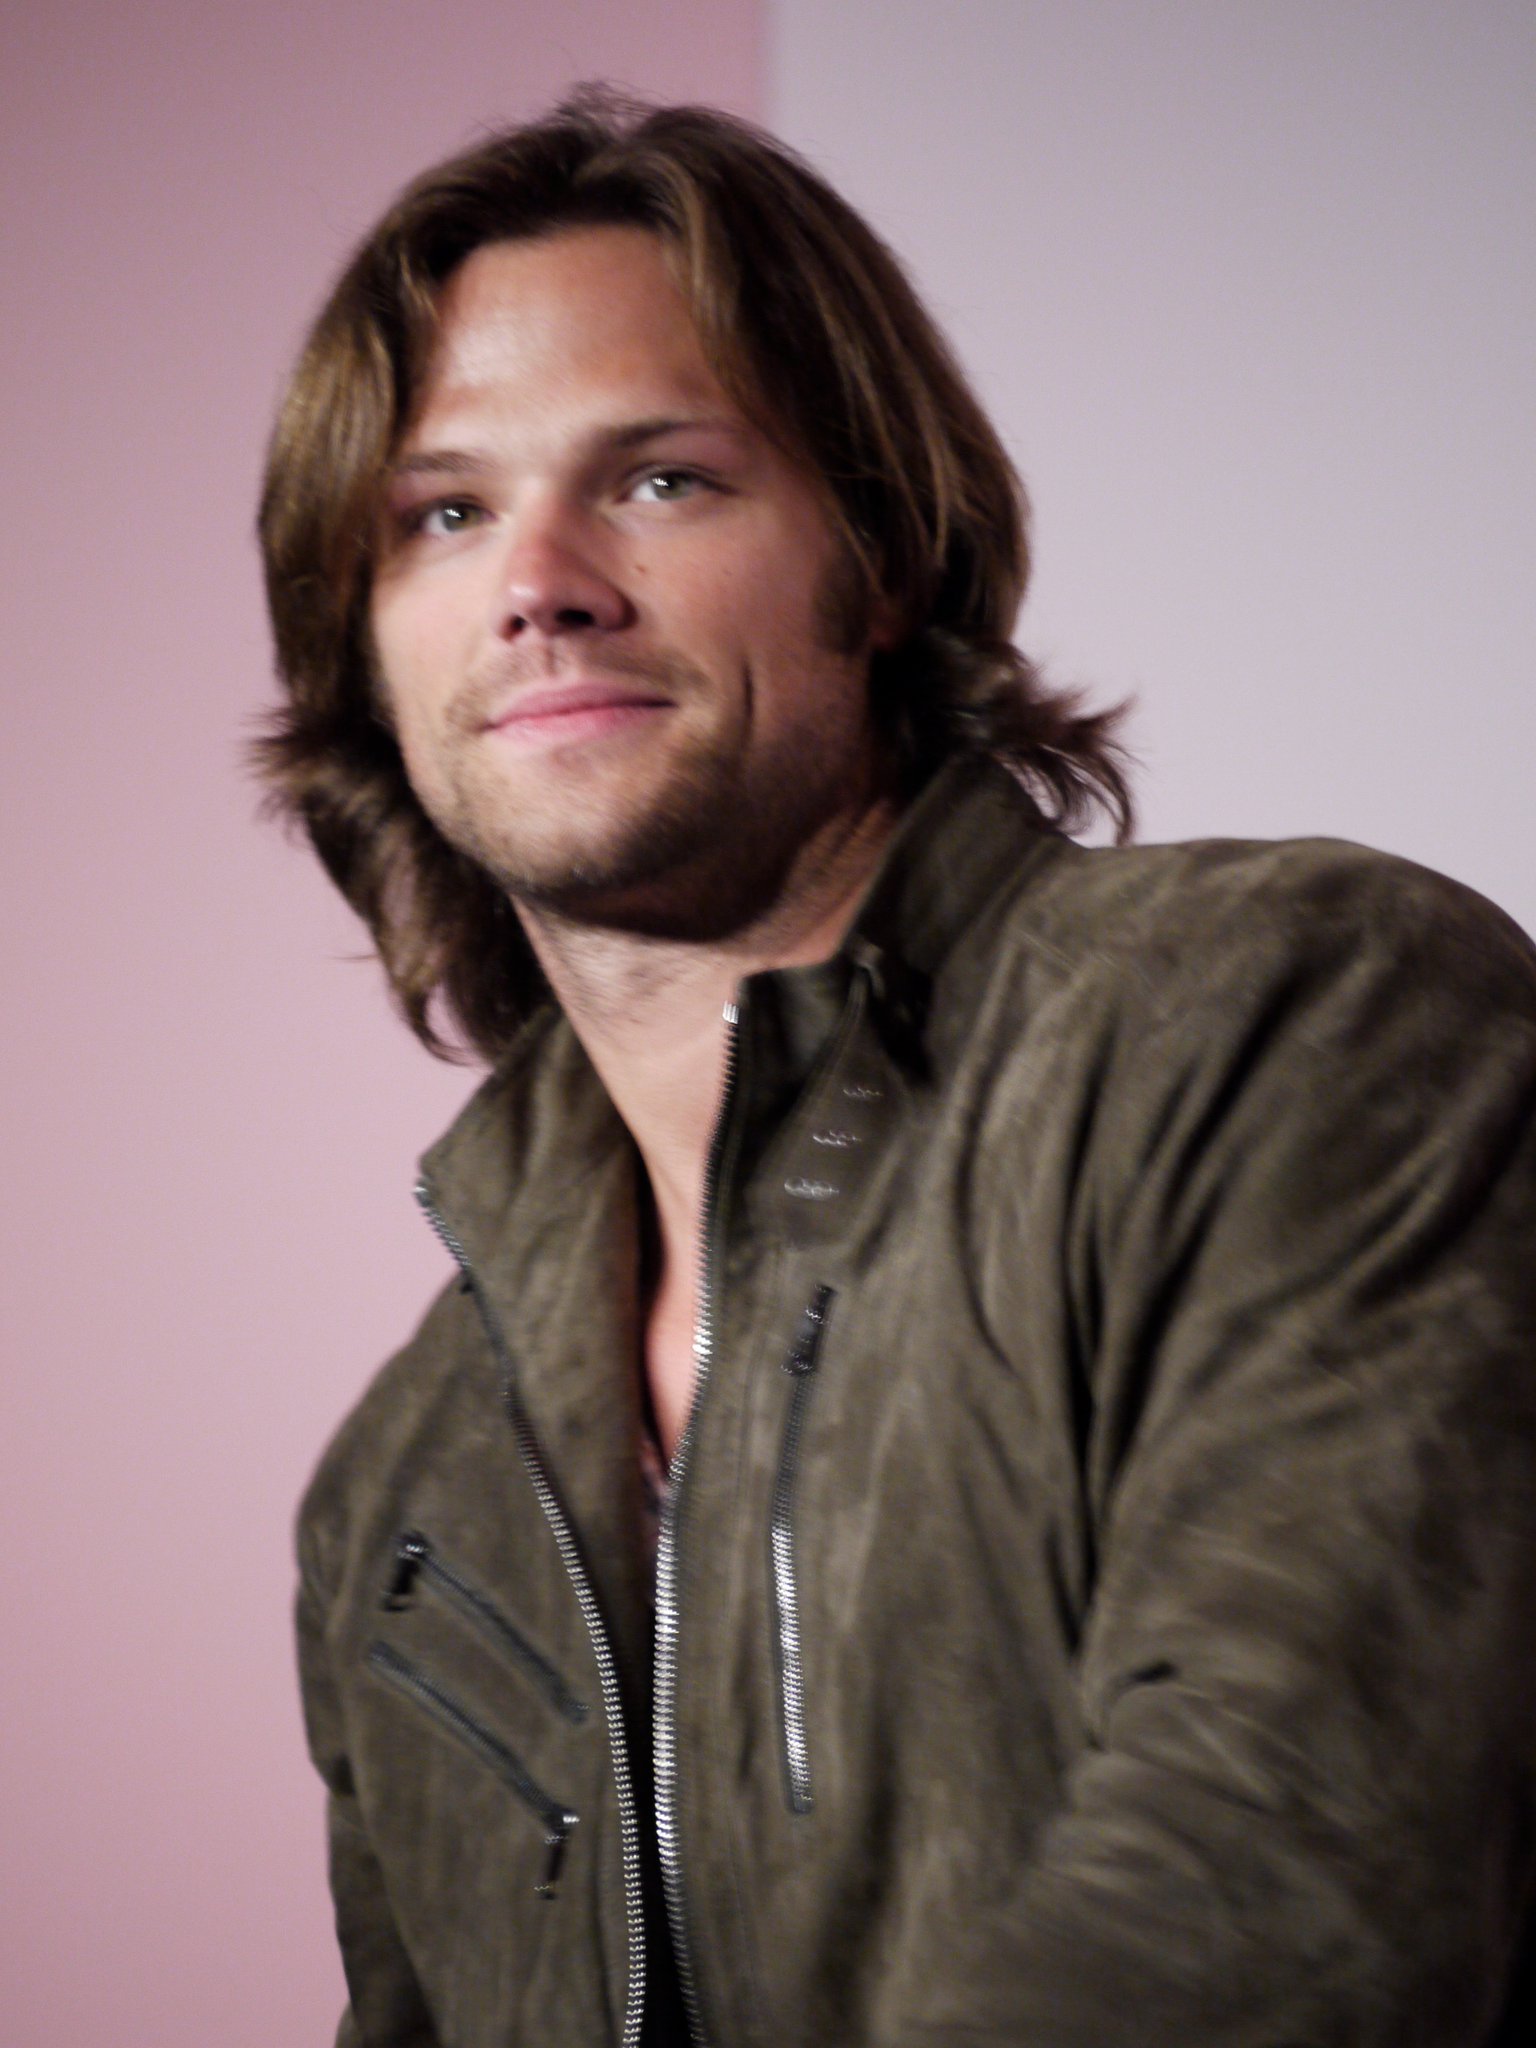 Jared Padalecki Backgrounds, Compatible - PC, Mobile, Gadgets| 1536x2048 px